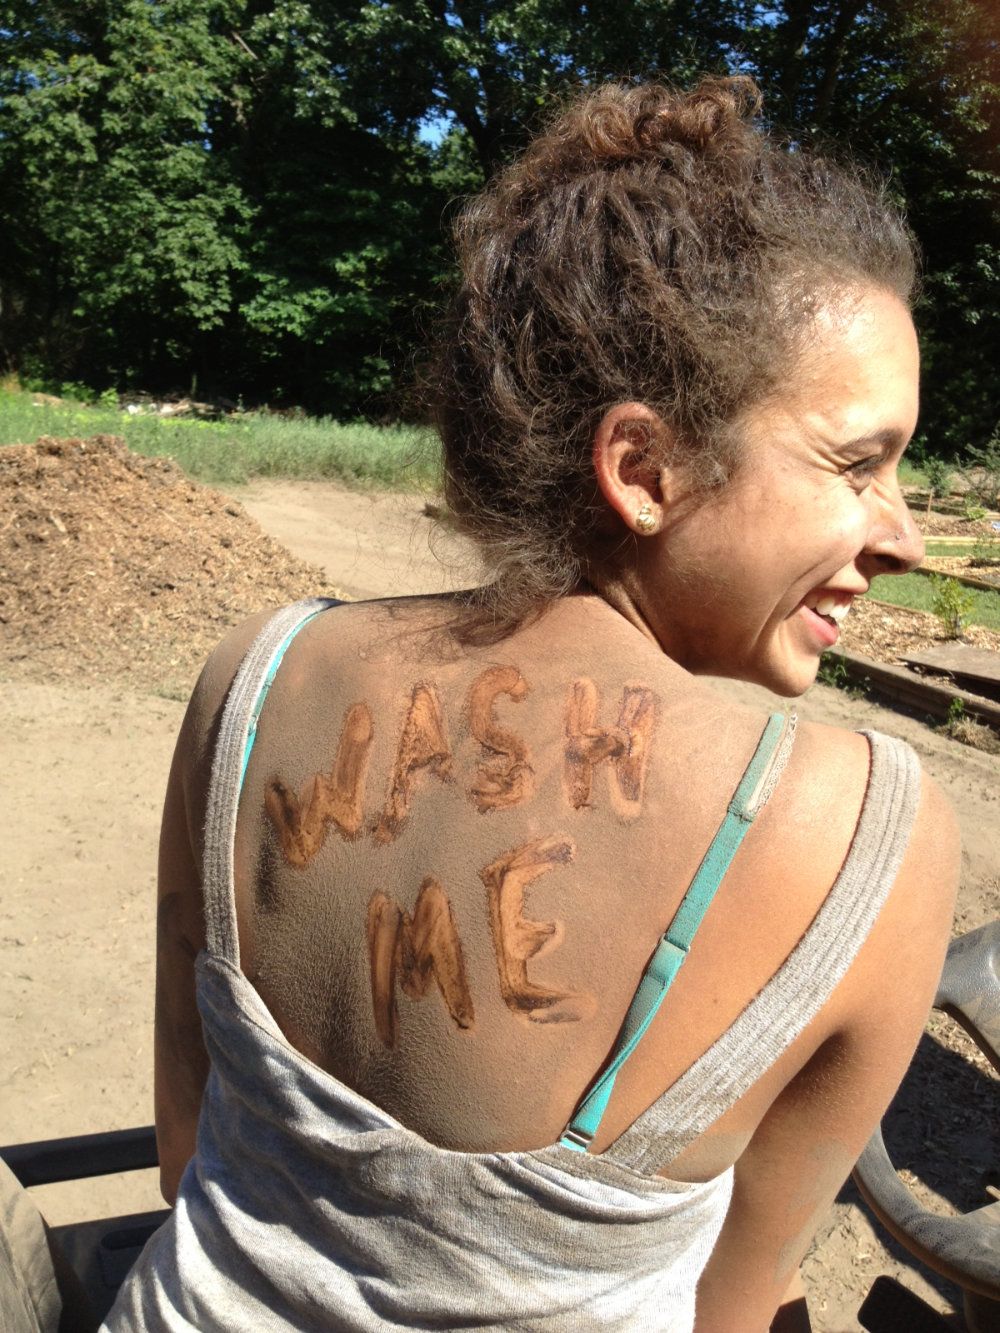 Our first summer intern, Emily, covered in dirt with the words "Wash Me" written on her back.